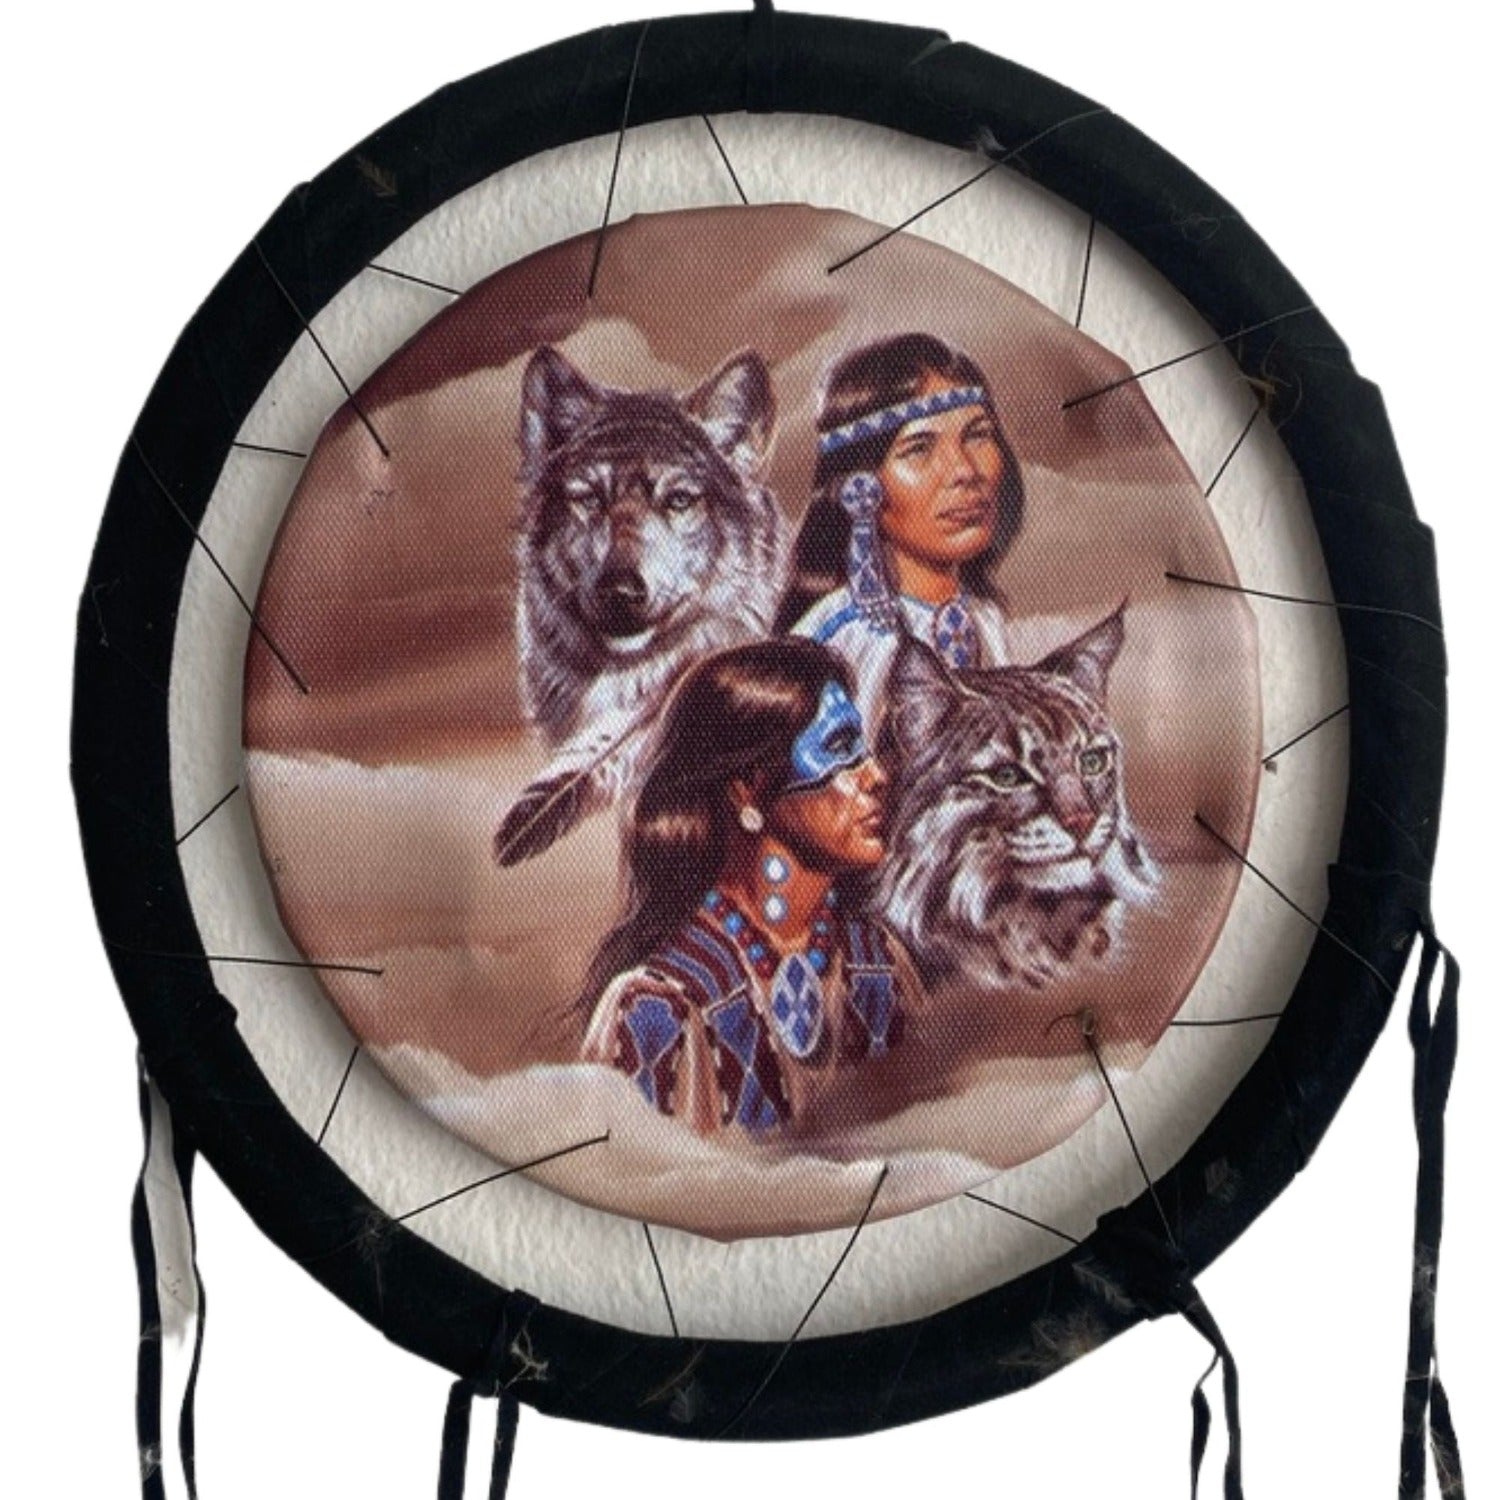 Small Dream Catcher with Feathers, Protective Wolf Design 8.5"